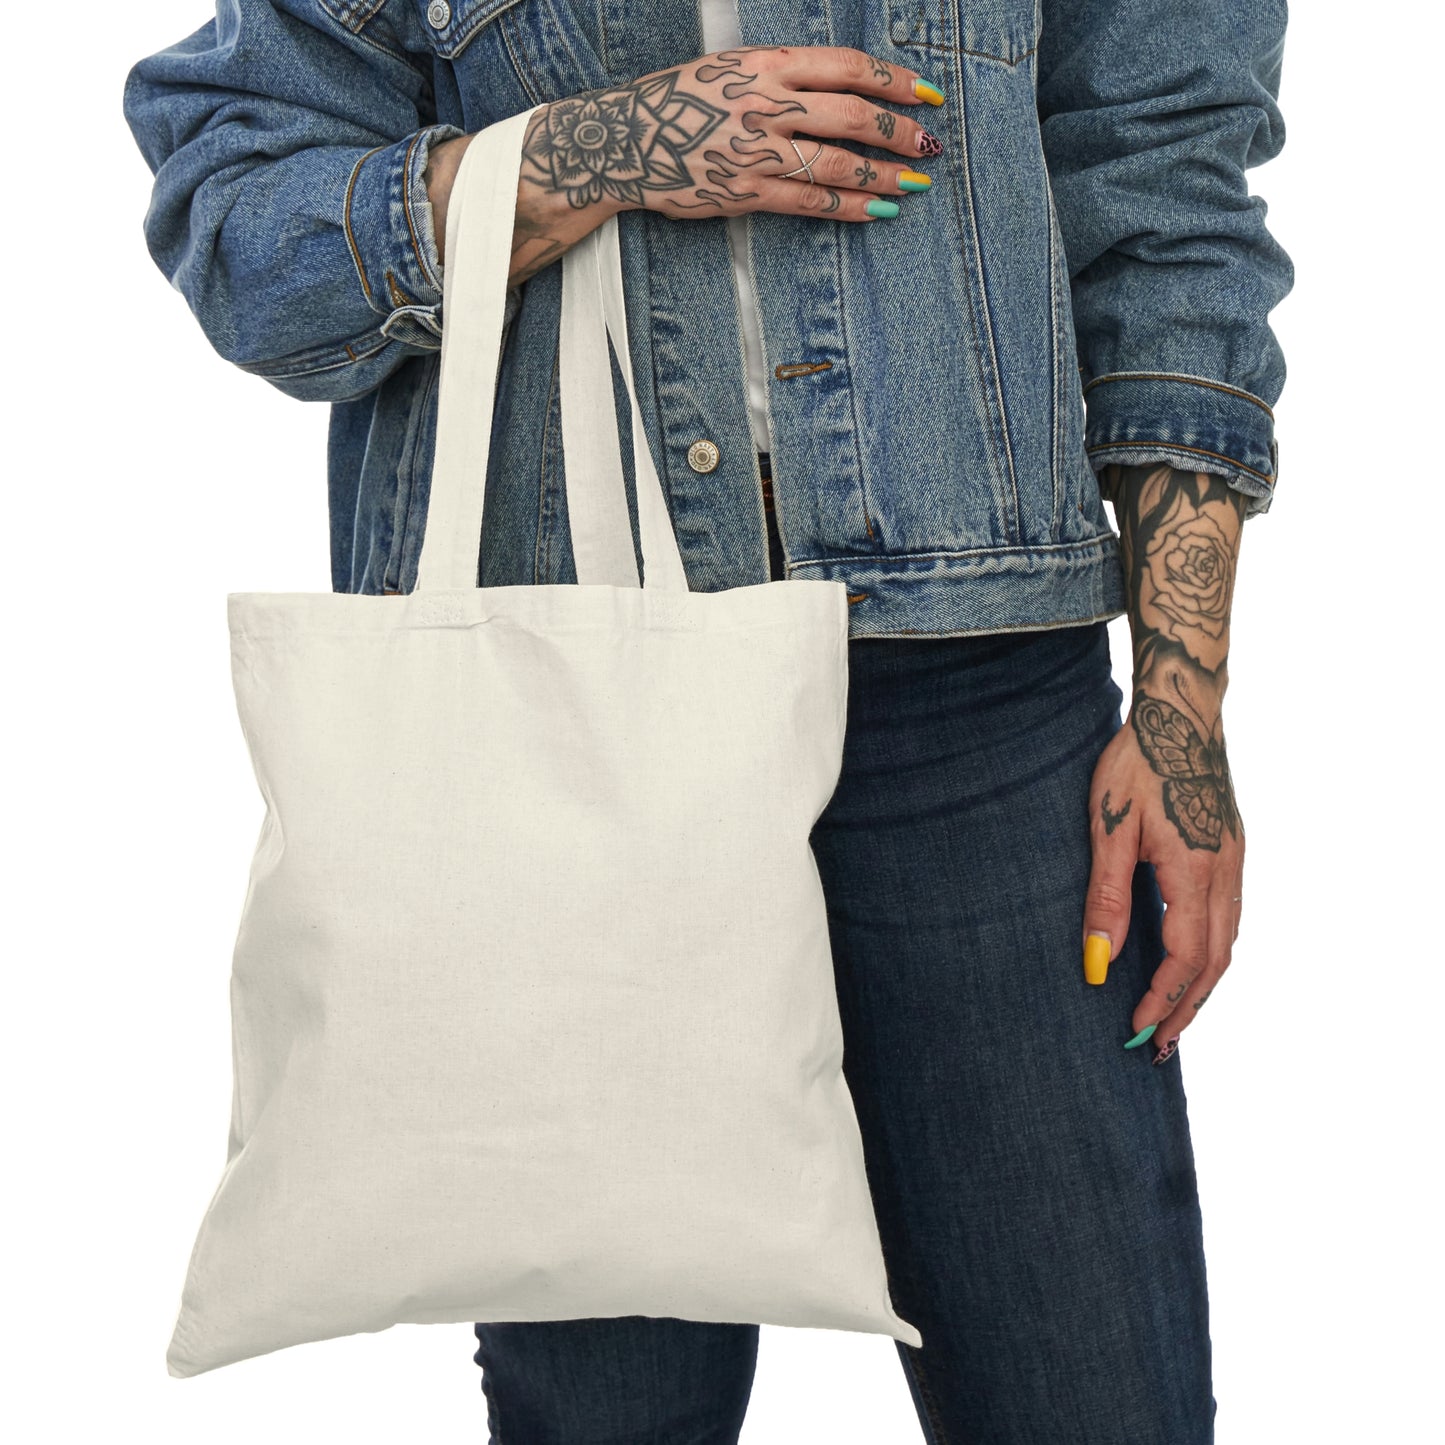 Standing in Shadows - Natural Tote Bag